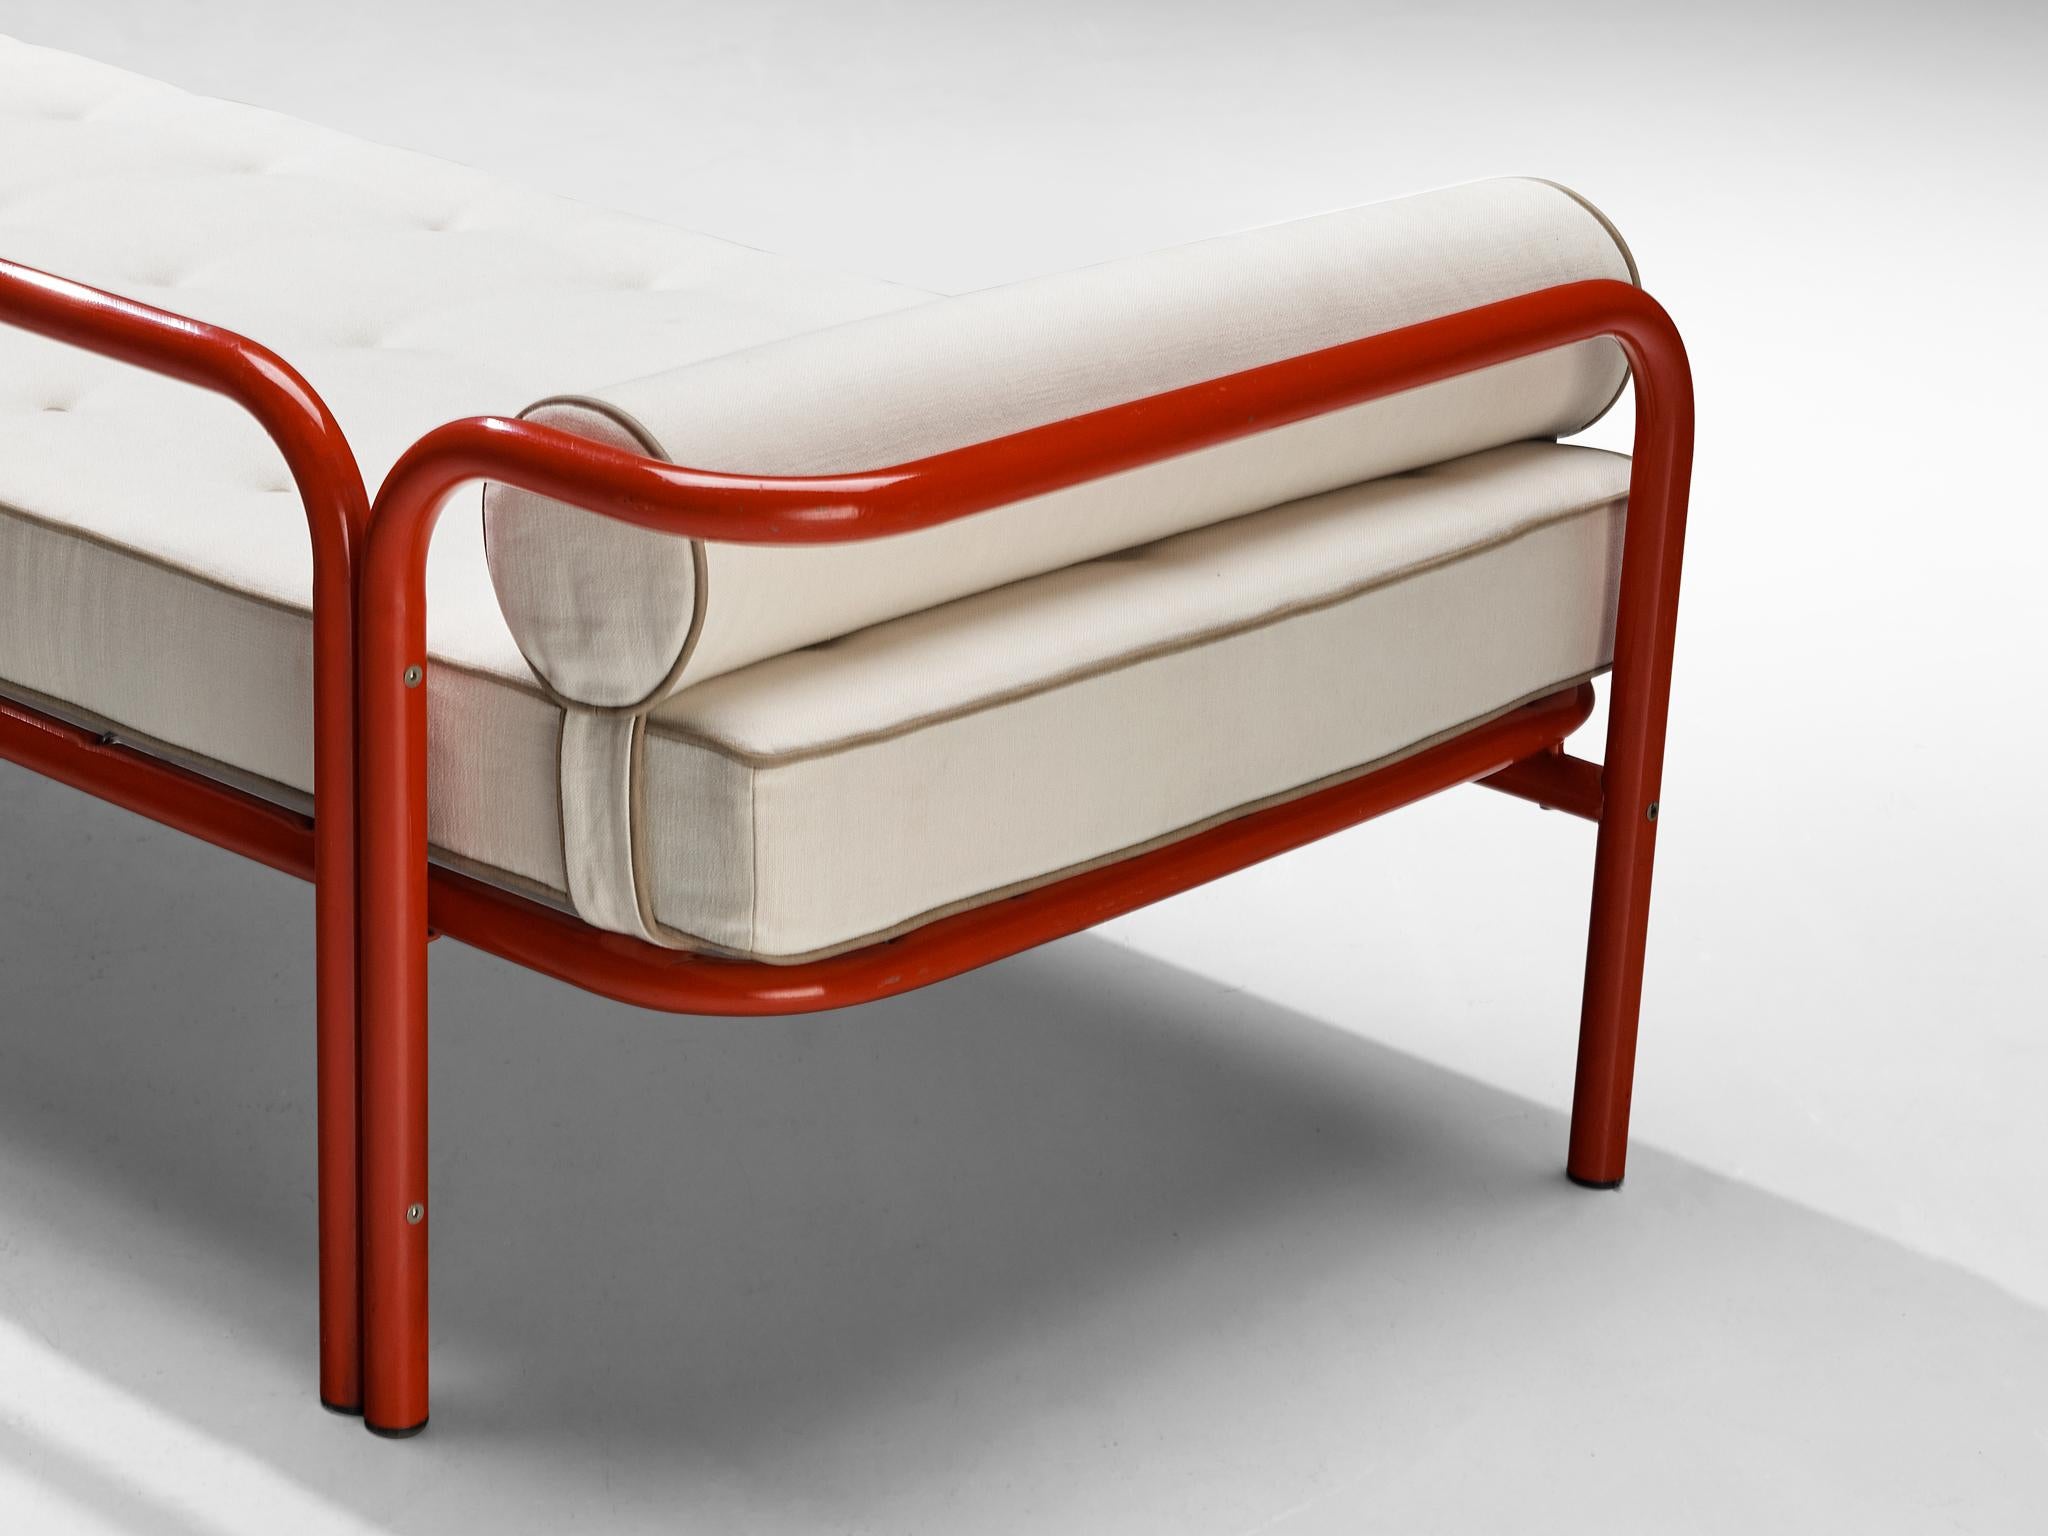 Gae Aulenti for Poltronova 'Locus Solus' Daybed in Red Steel  For Sale 2